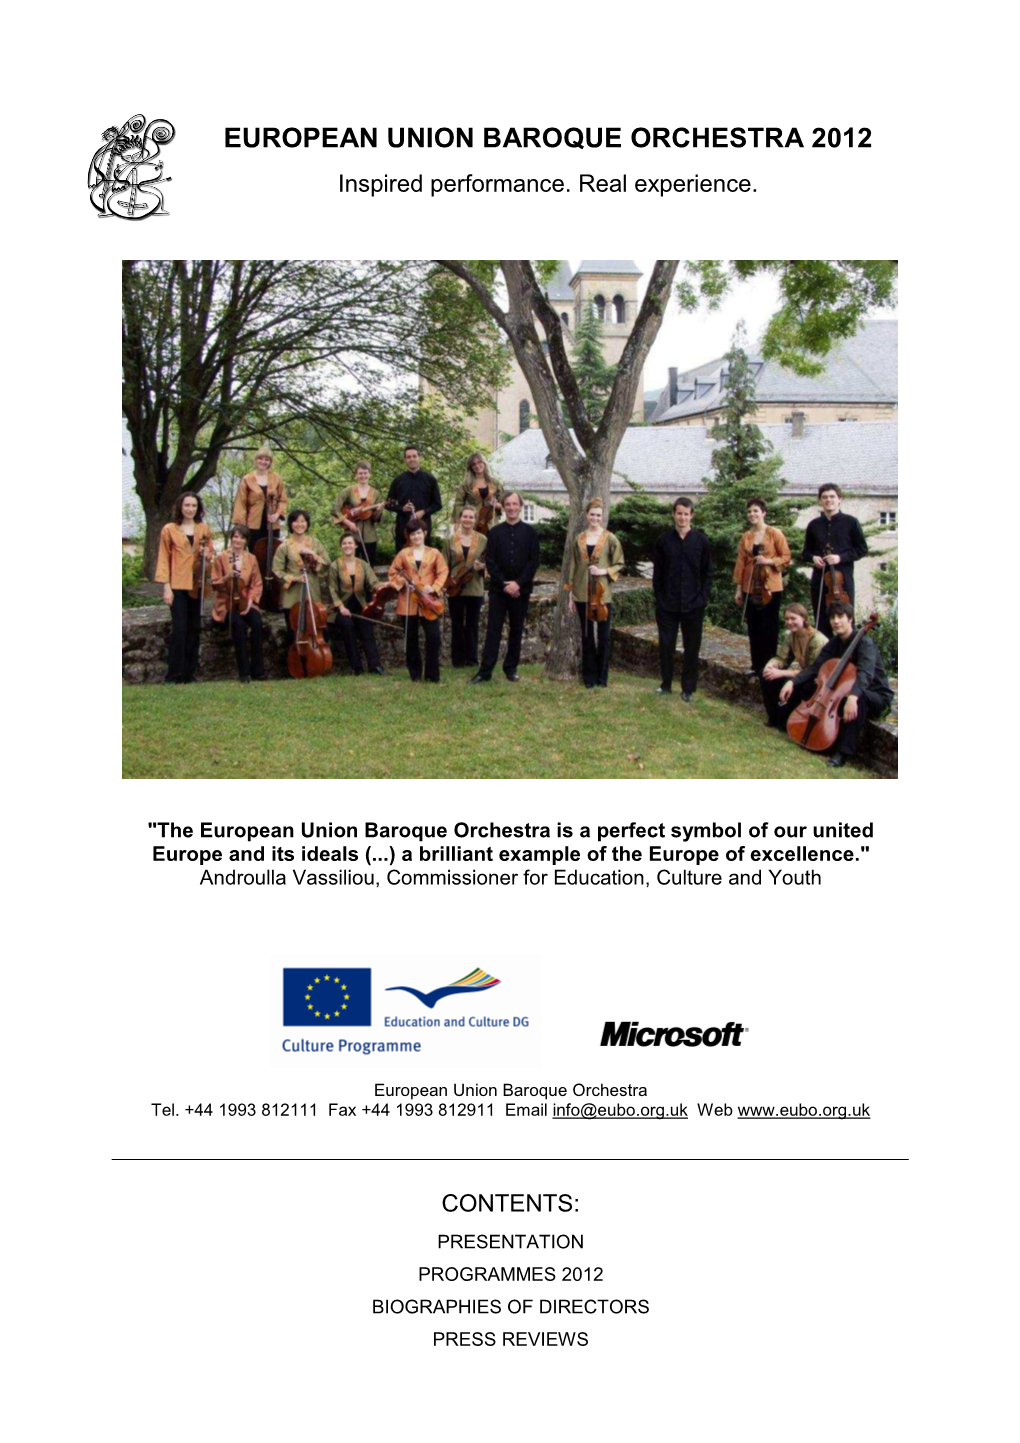 EUROPEAN UNION BAROQUE ORCHESTRA 2012 Inspired Performance